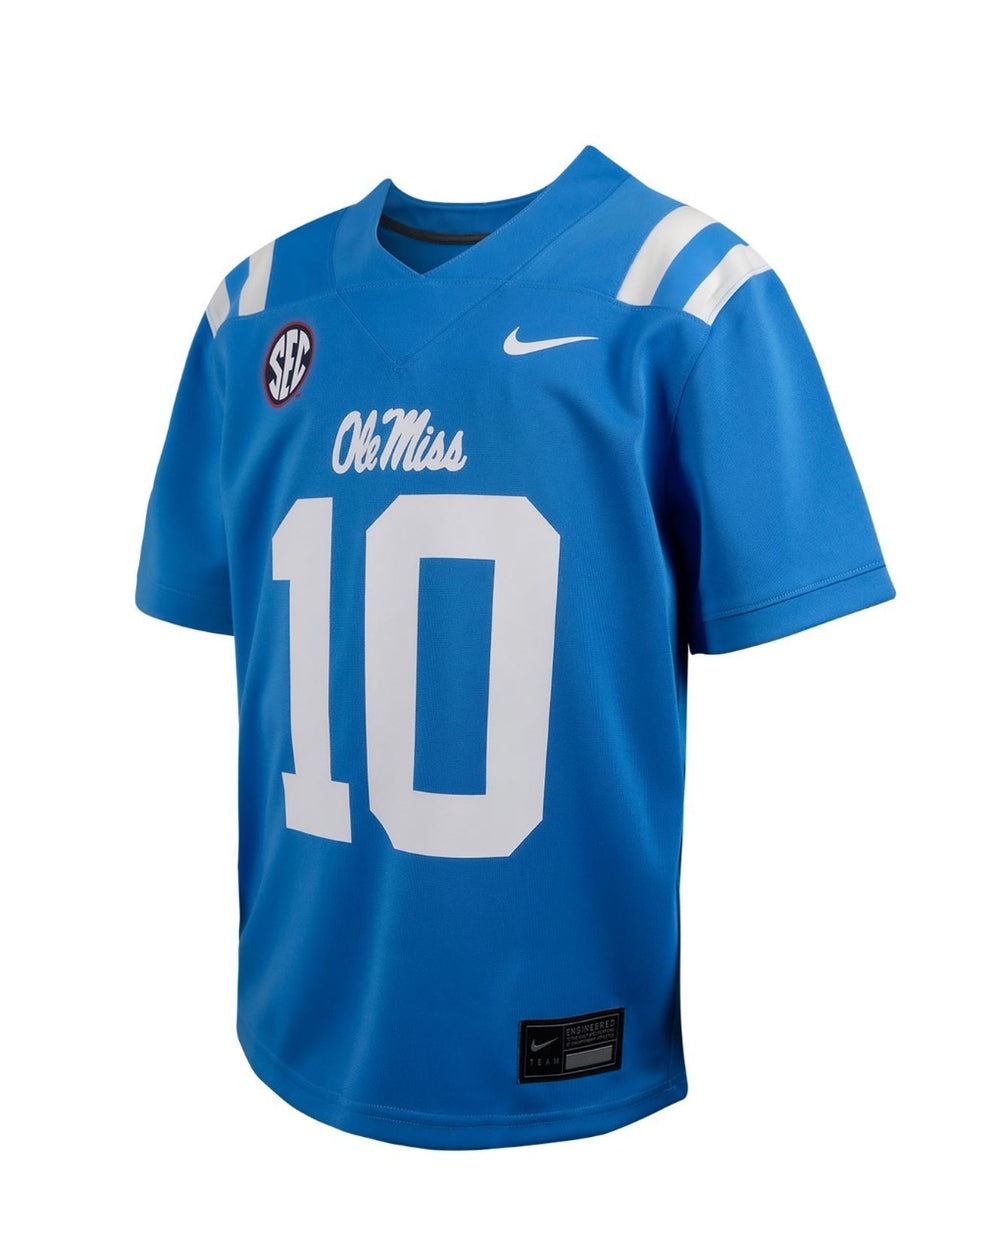 Nike Toddler and Youth Ole Miss Replica Football Jersey